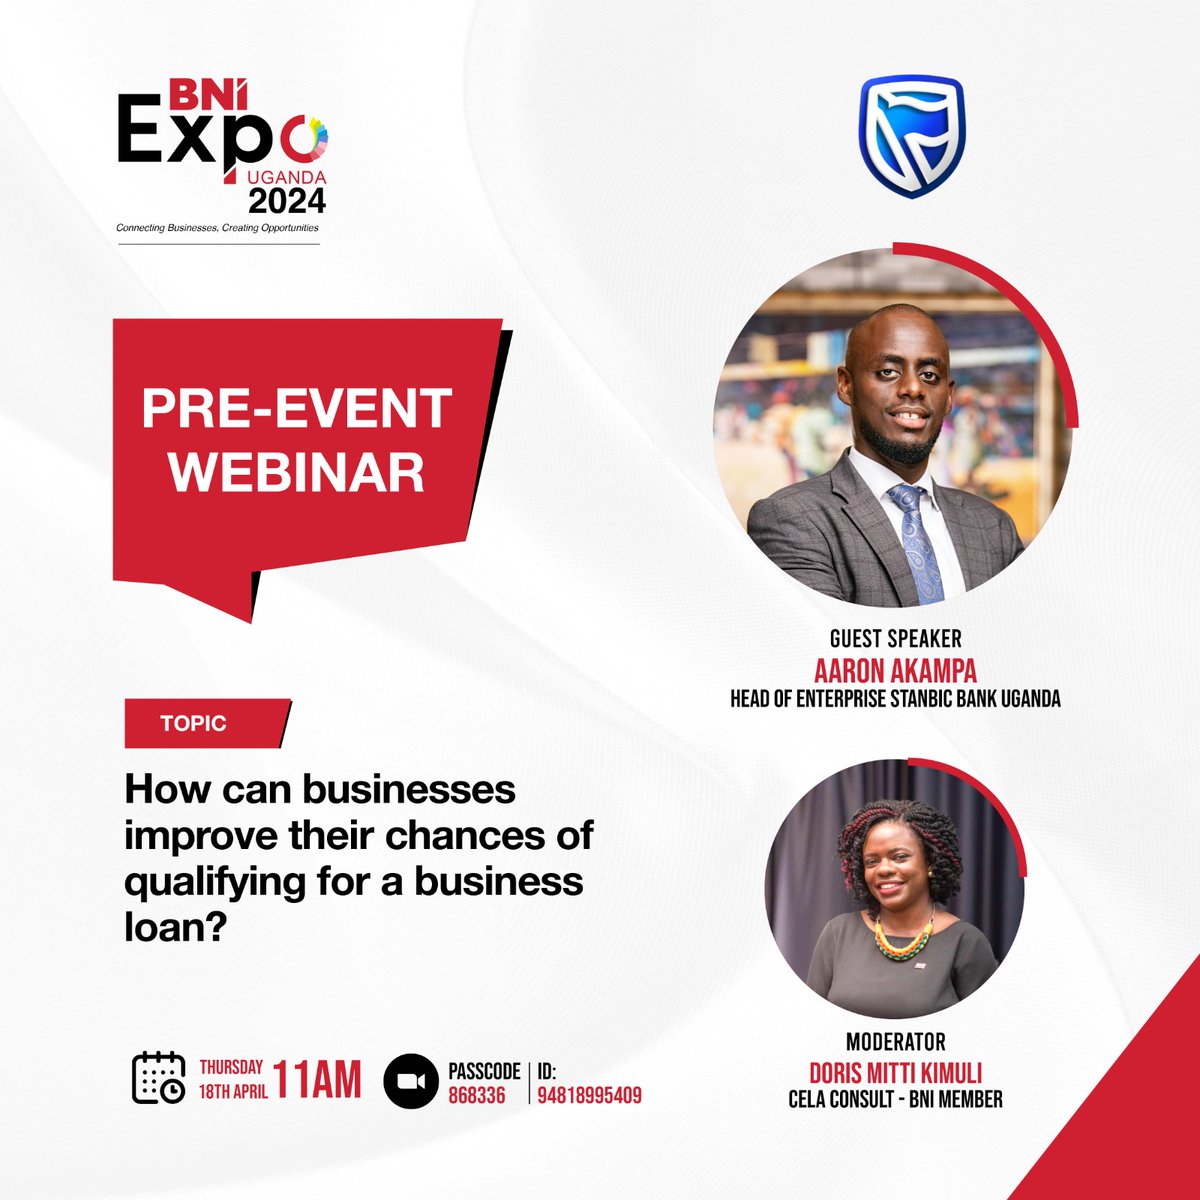 Struggling to secure a business loan? Join the FREE BNI & @stanbicug webinar at 11 AM! Learn how to improve your chances, even with limited credit history or collateral. Register in advance for this webinar: zurl.co/TZh0 #BNIExpo2024